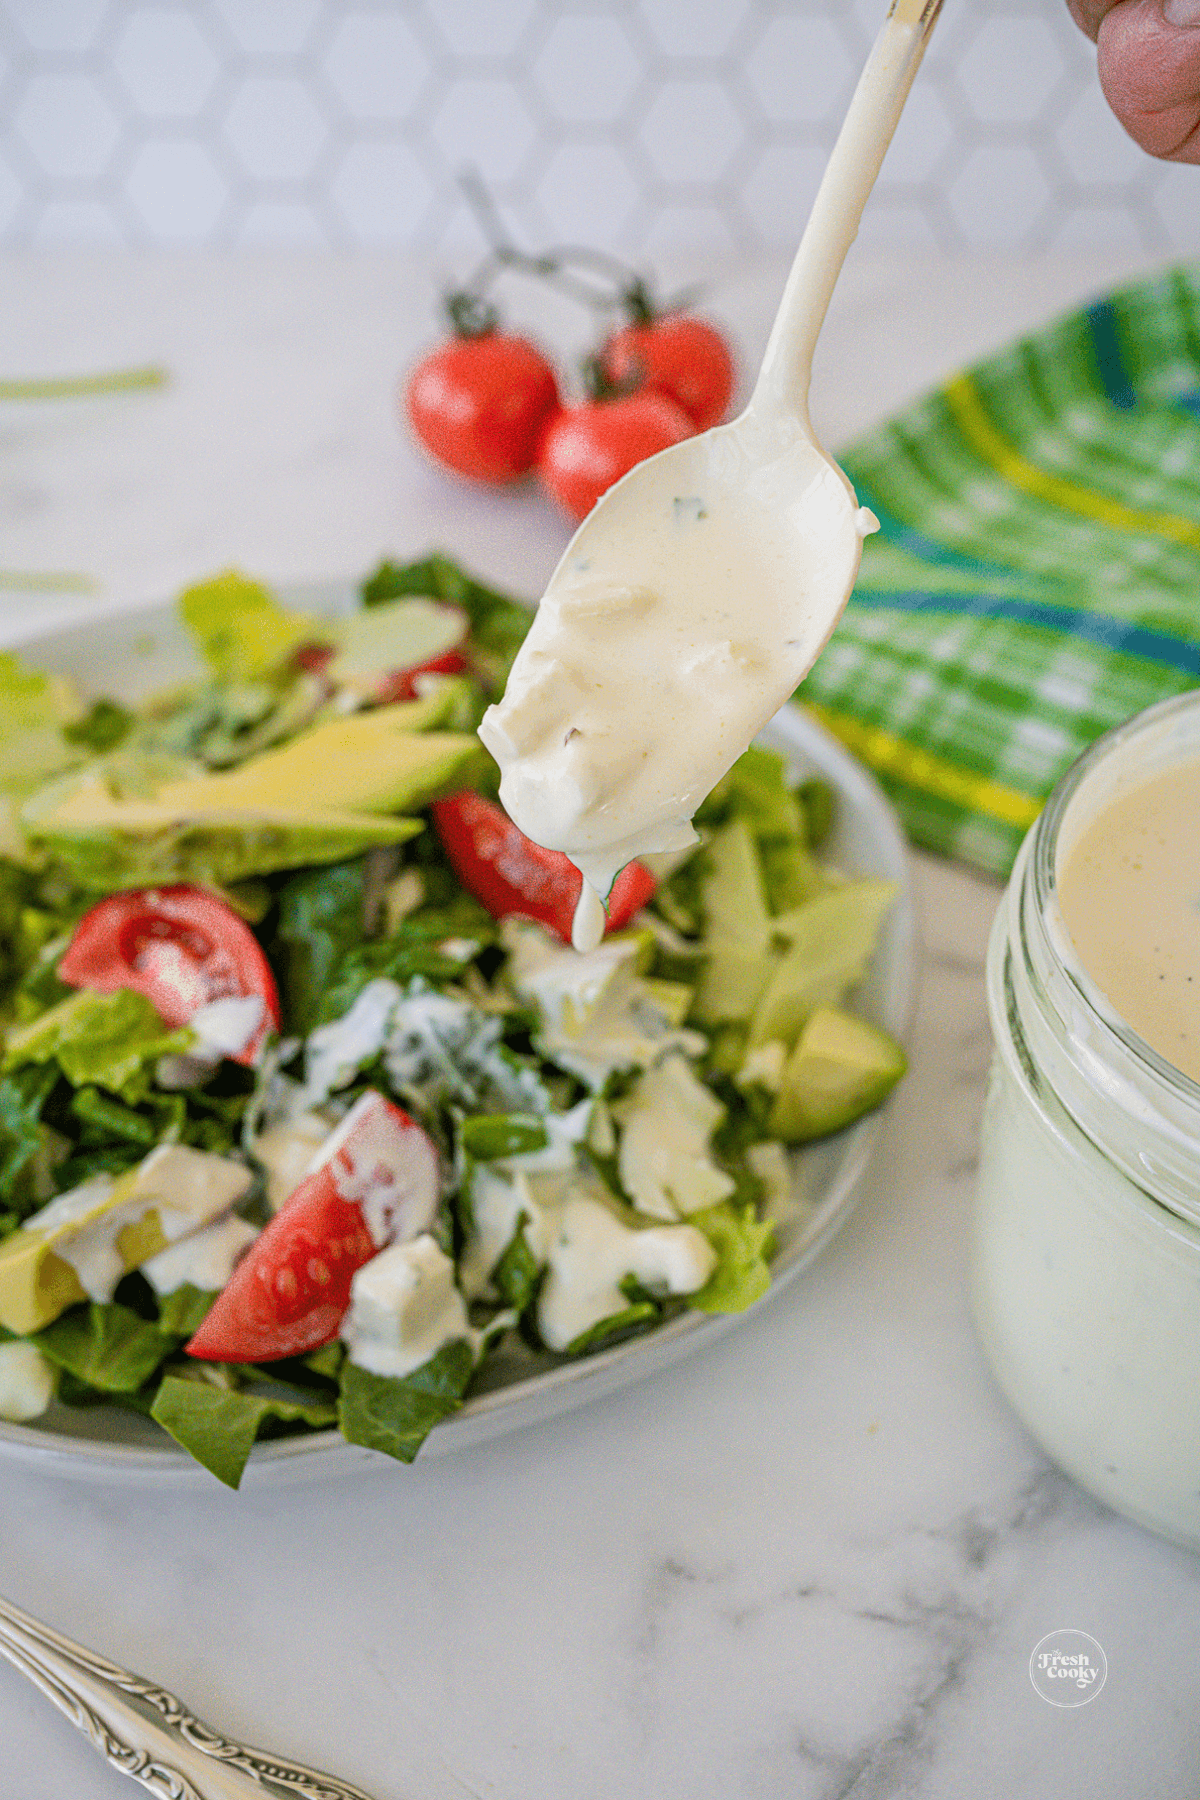 Drizzling blue cheese dressing onto a fresh salad.